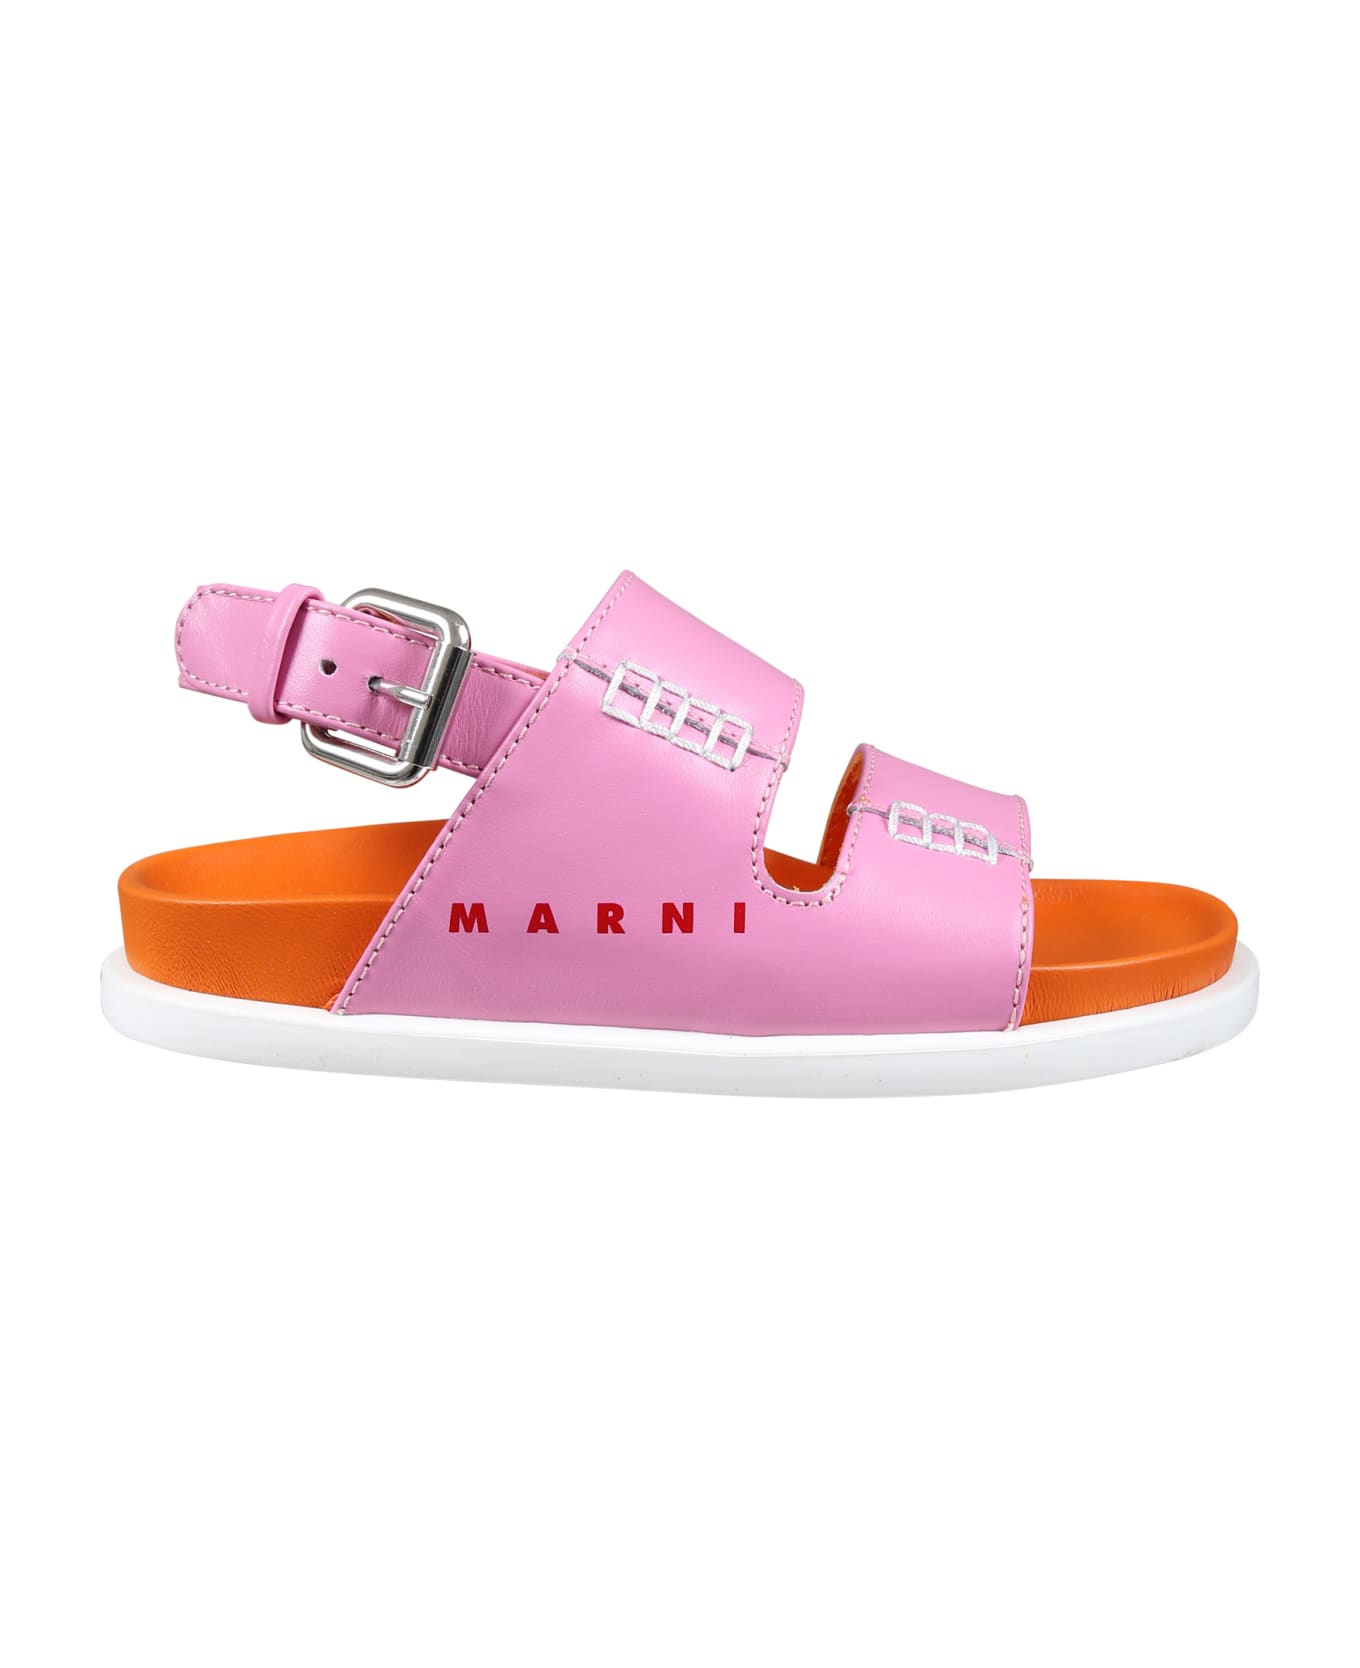 Marni Pink Sandals For Girl With Logo - Pink シューズ